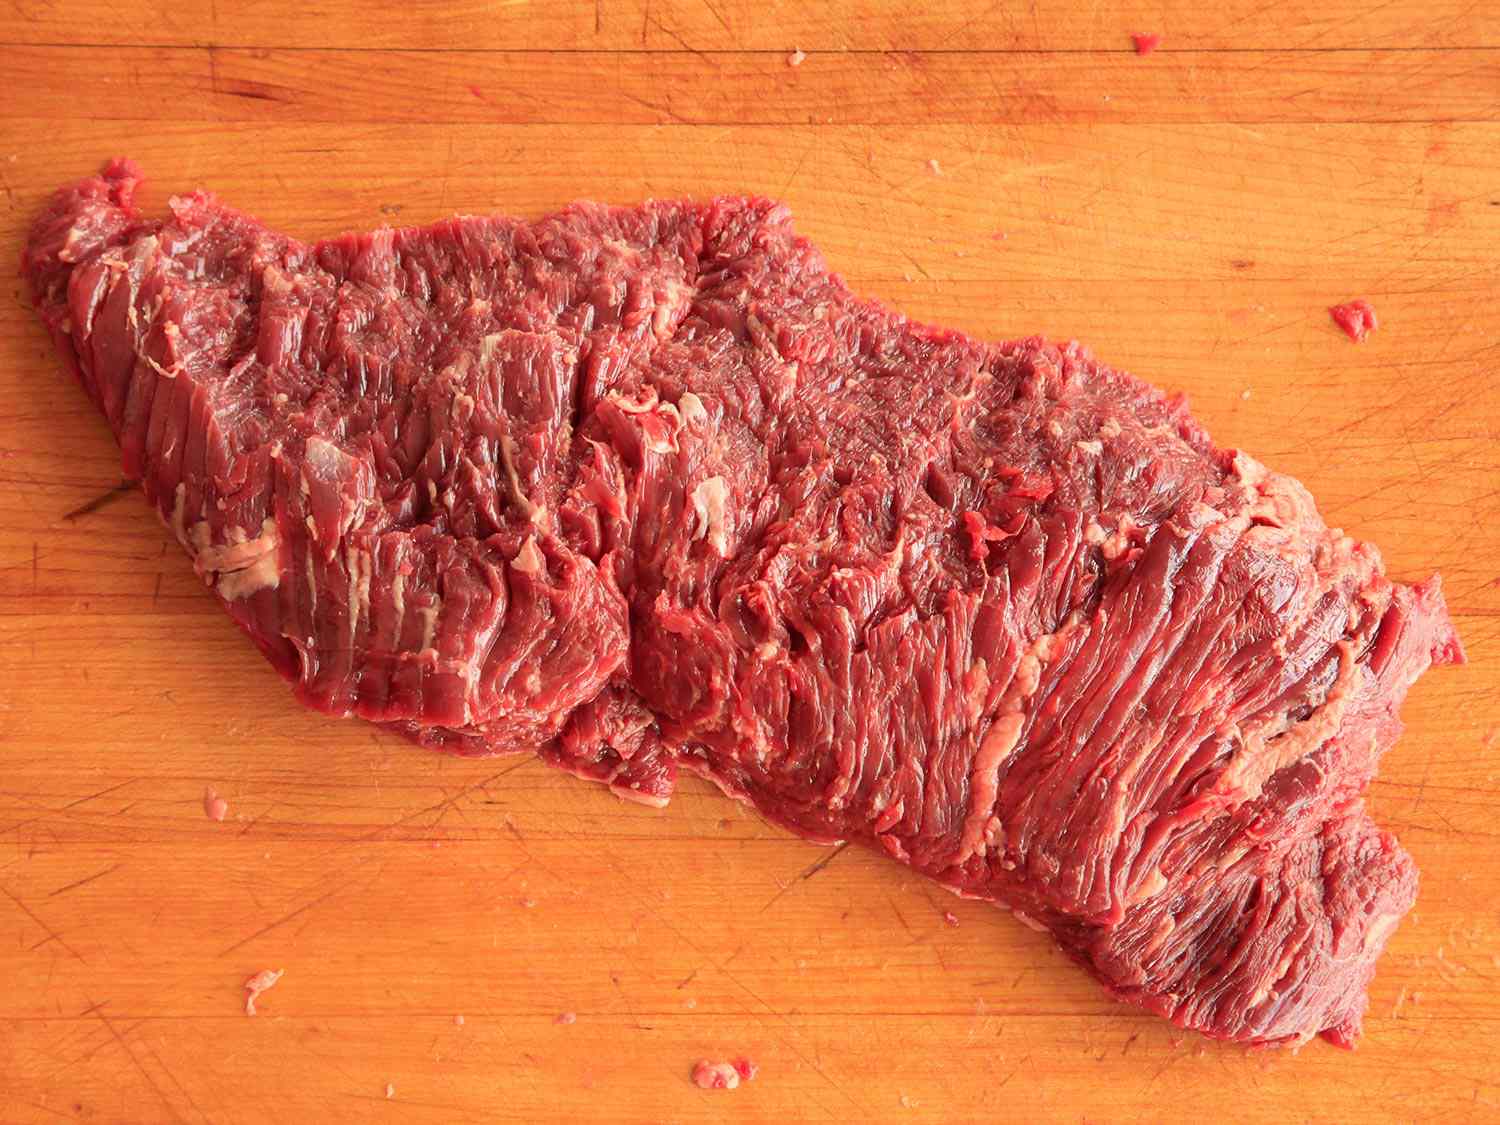 Raw flap steak on a wooden surface